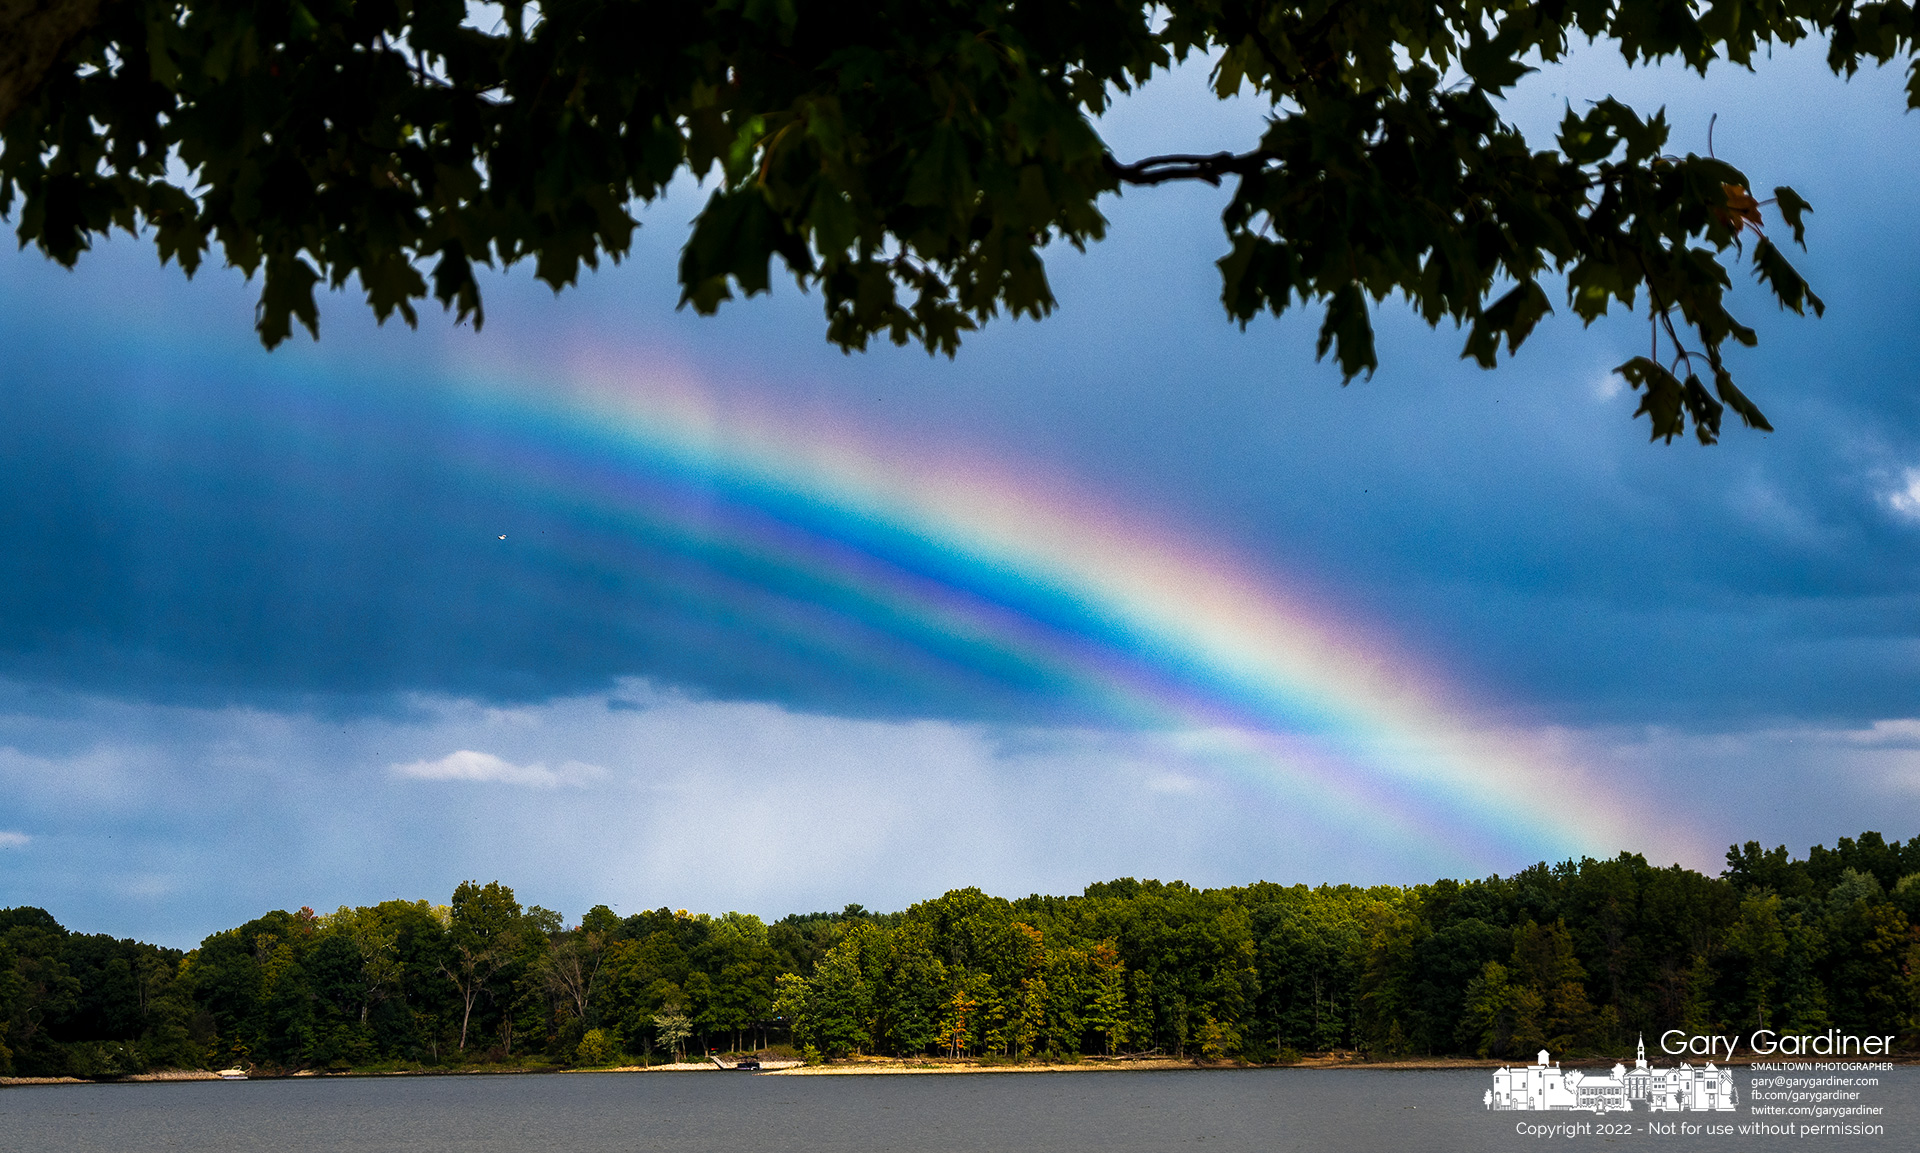 A large rainbow follows an afternoon storm cloud that moved over Red Bank Park at Hoover Reservoir. My Final Photo for September 27, 2022.